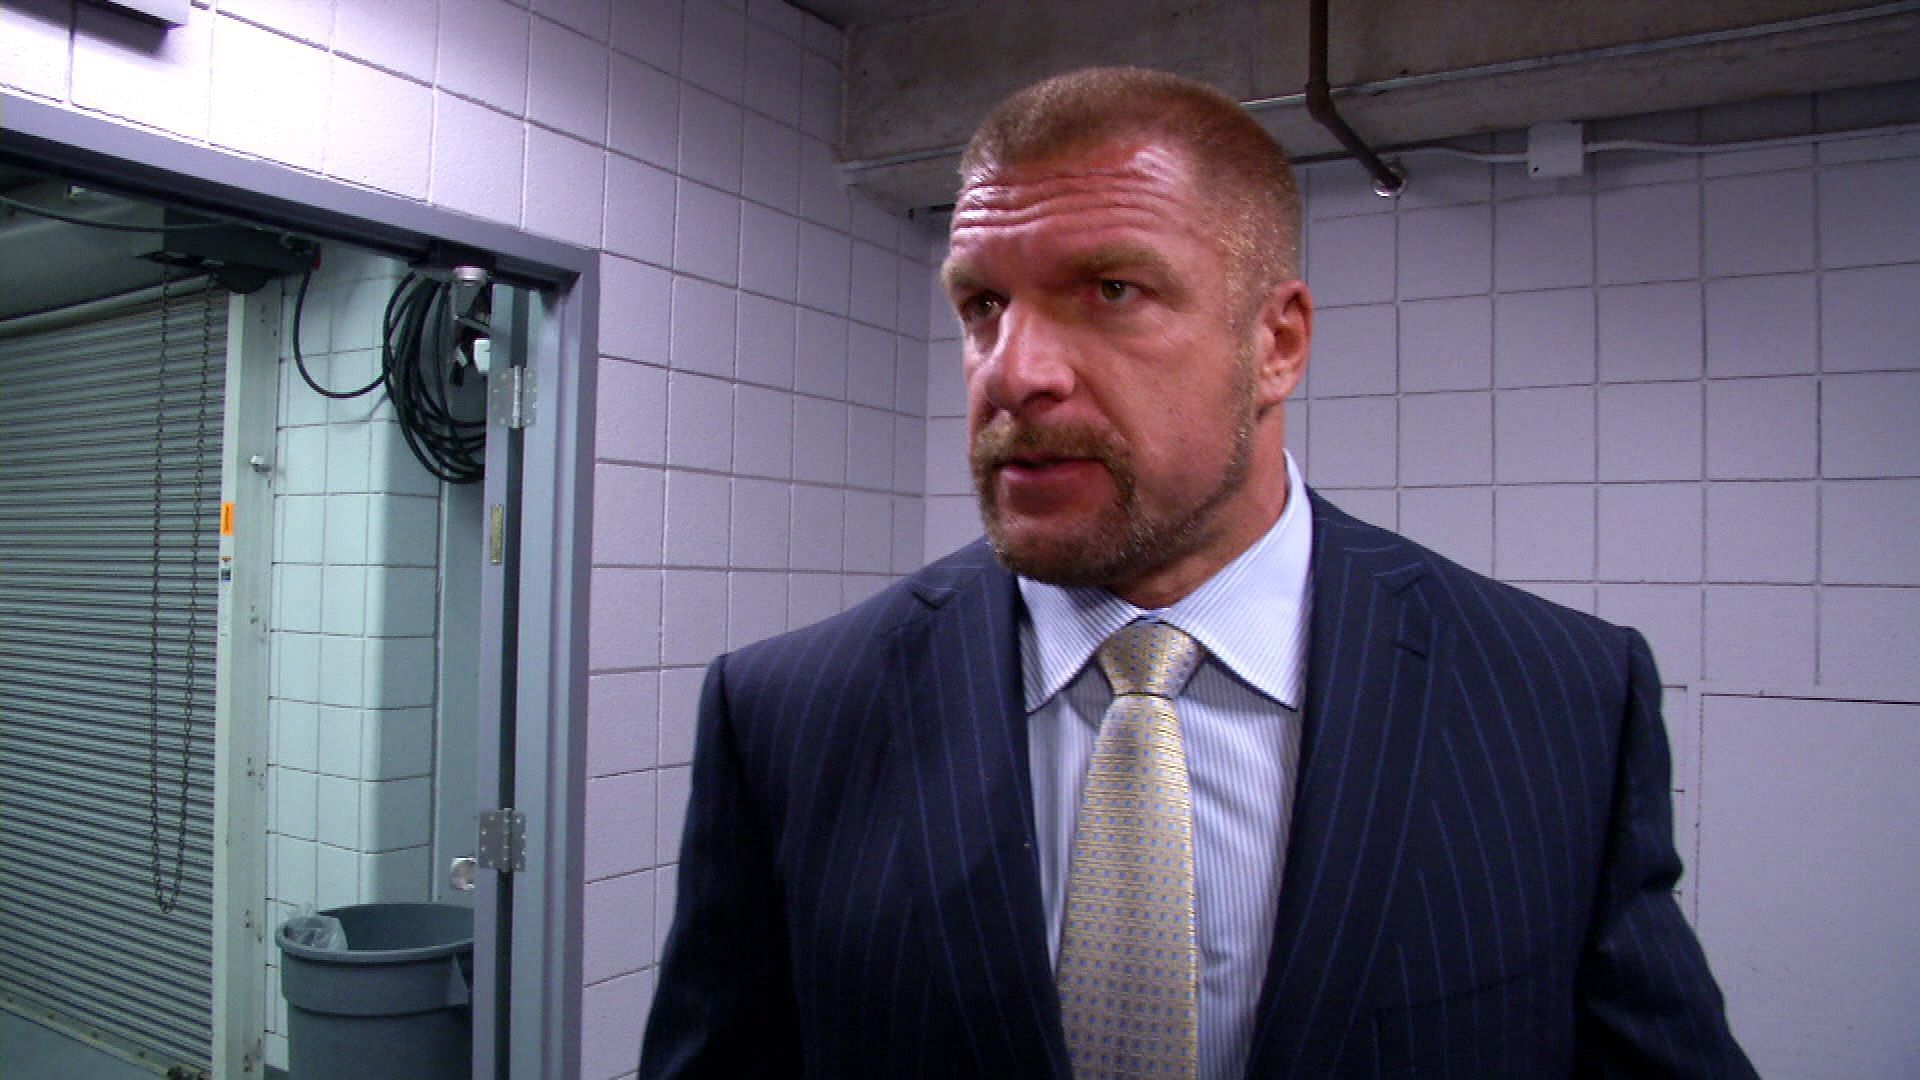 Triple H was closely associated with Chyna in WWE.